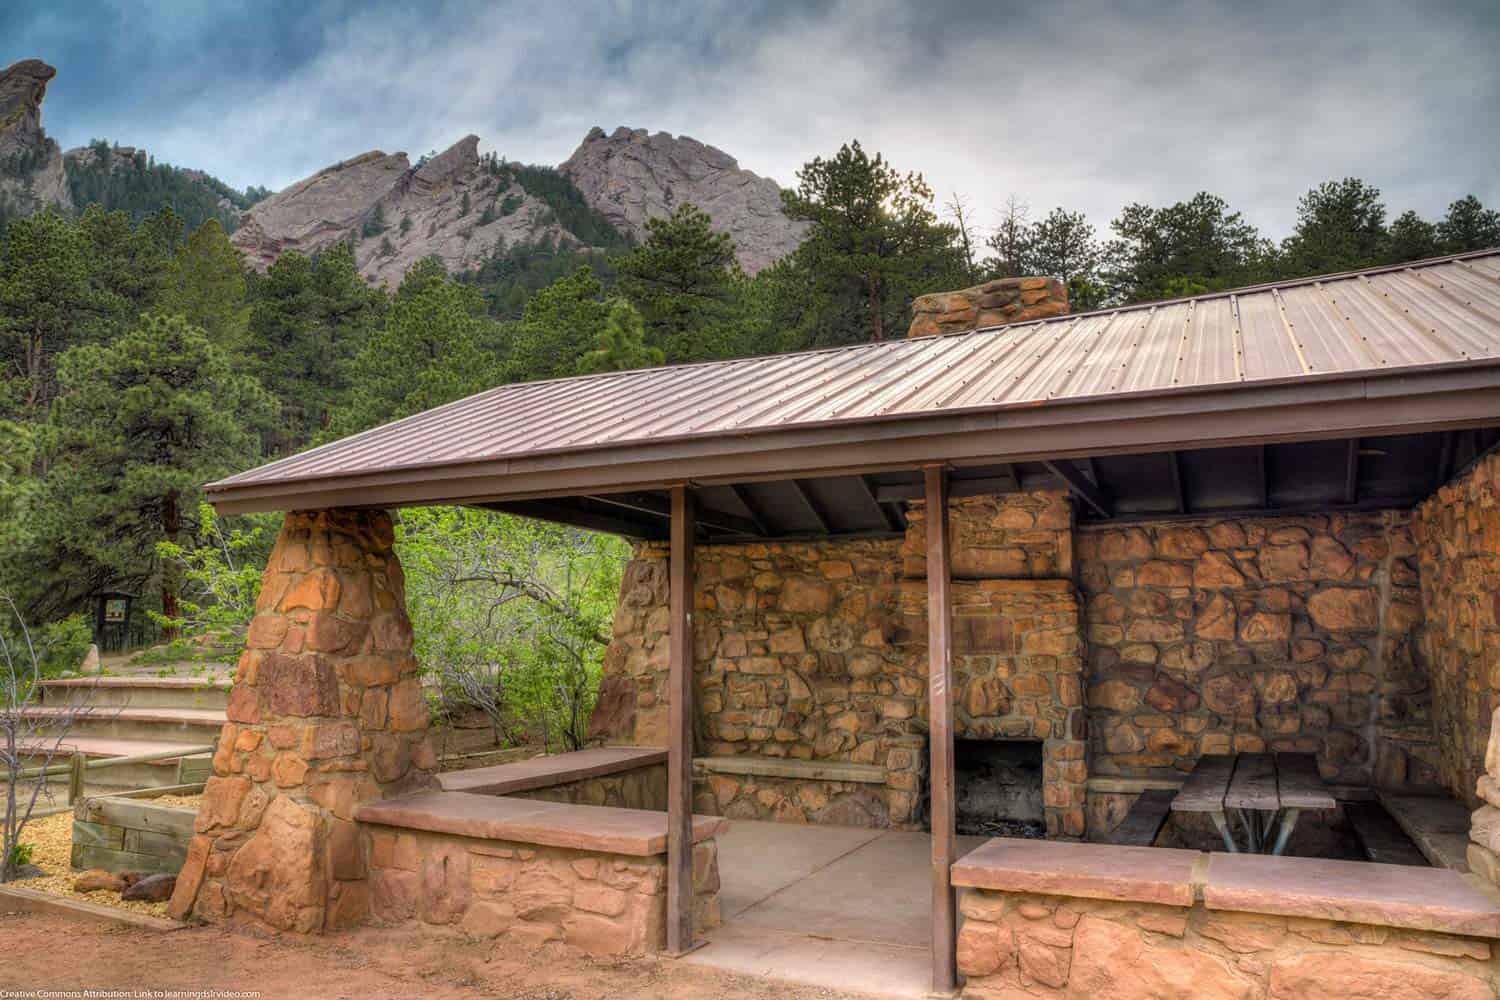 shelter along the bluebell road trail in chautauqua park boulder with flatirons in background